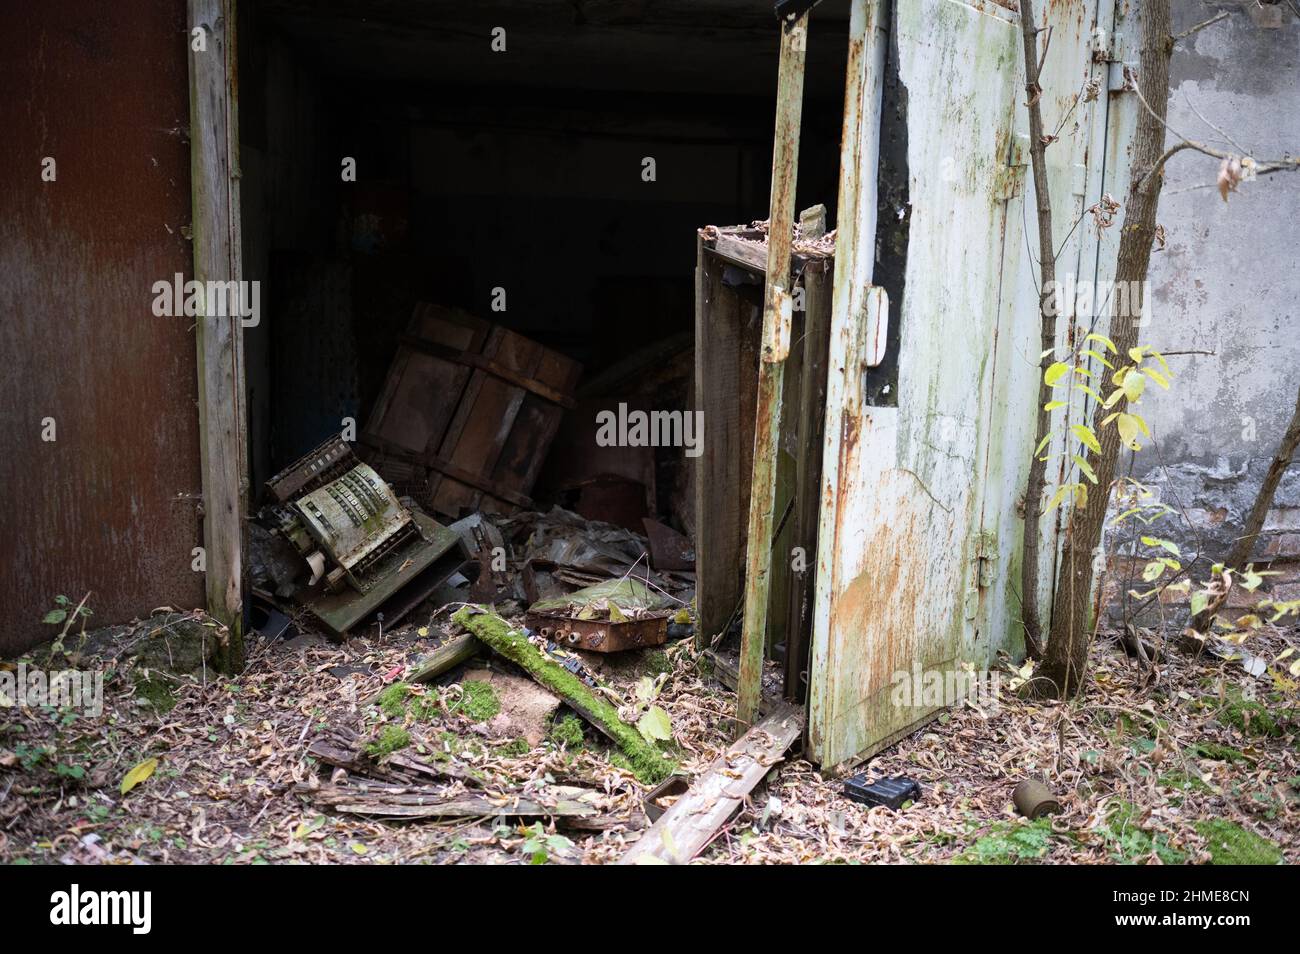 Storage lockers filled with discarded goods in Pripyat, Ukraine near the Chernobyl Nuclear Power Plant. Stock Photo